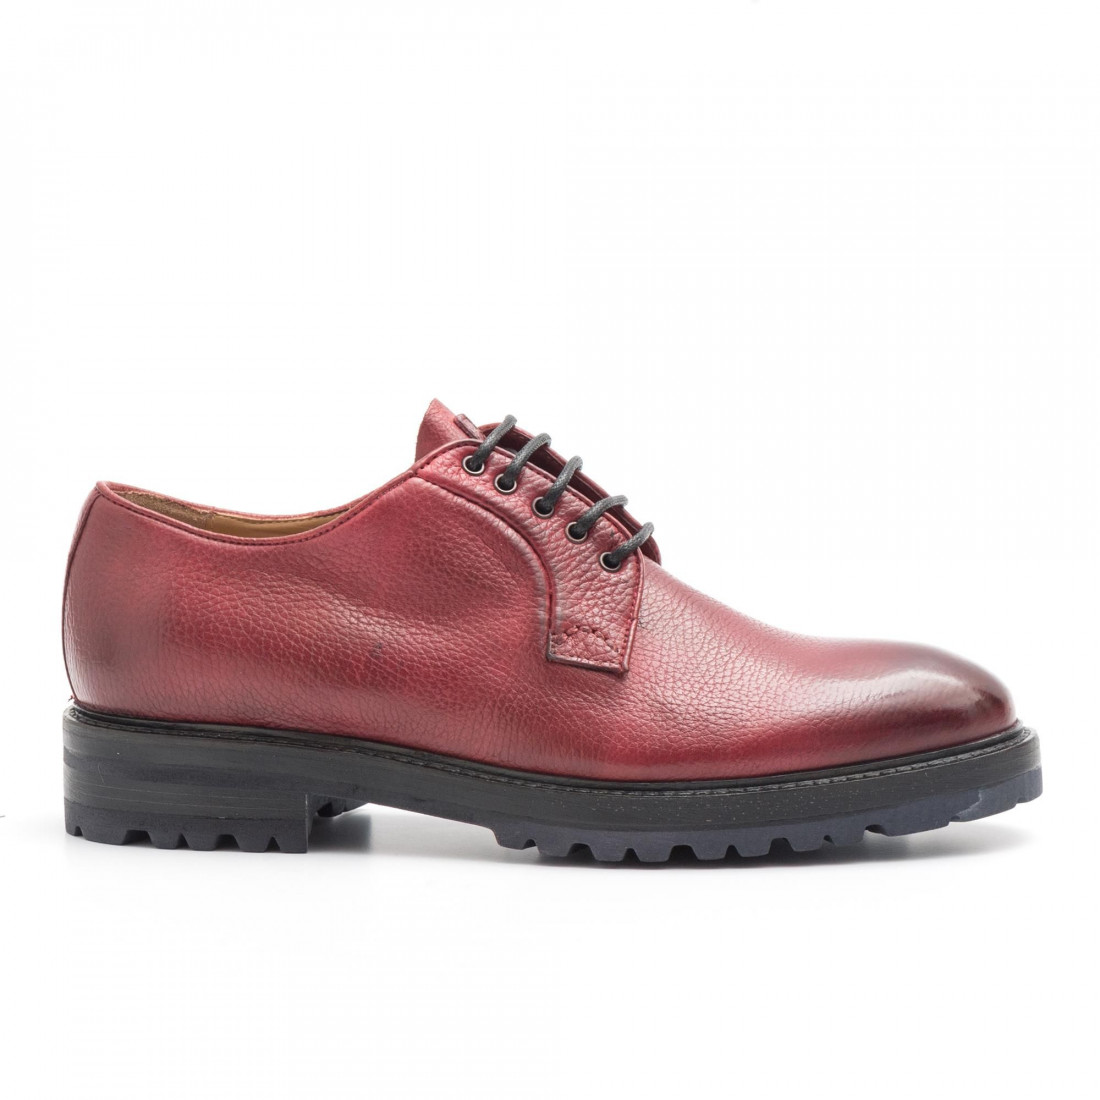 Soft red elk leather Brecos derby shoese